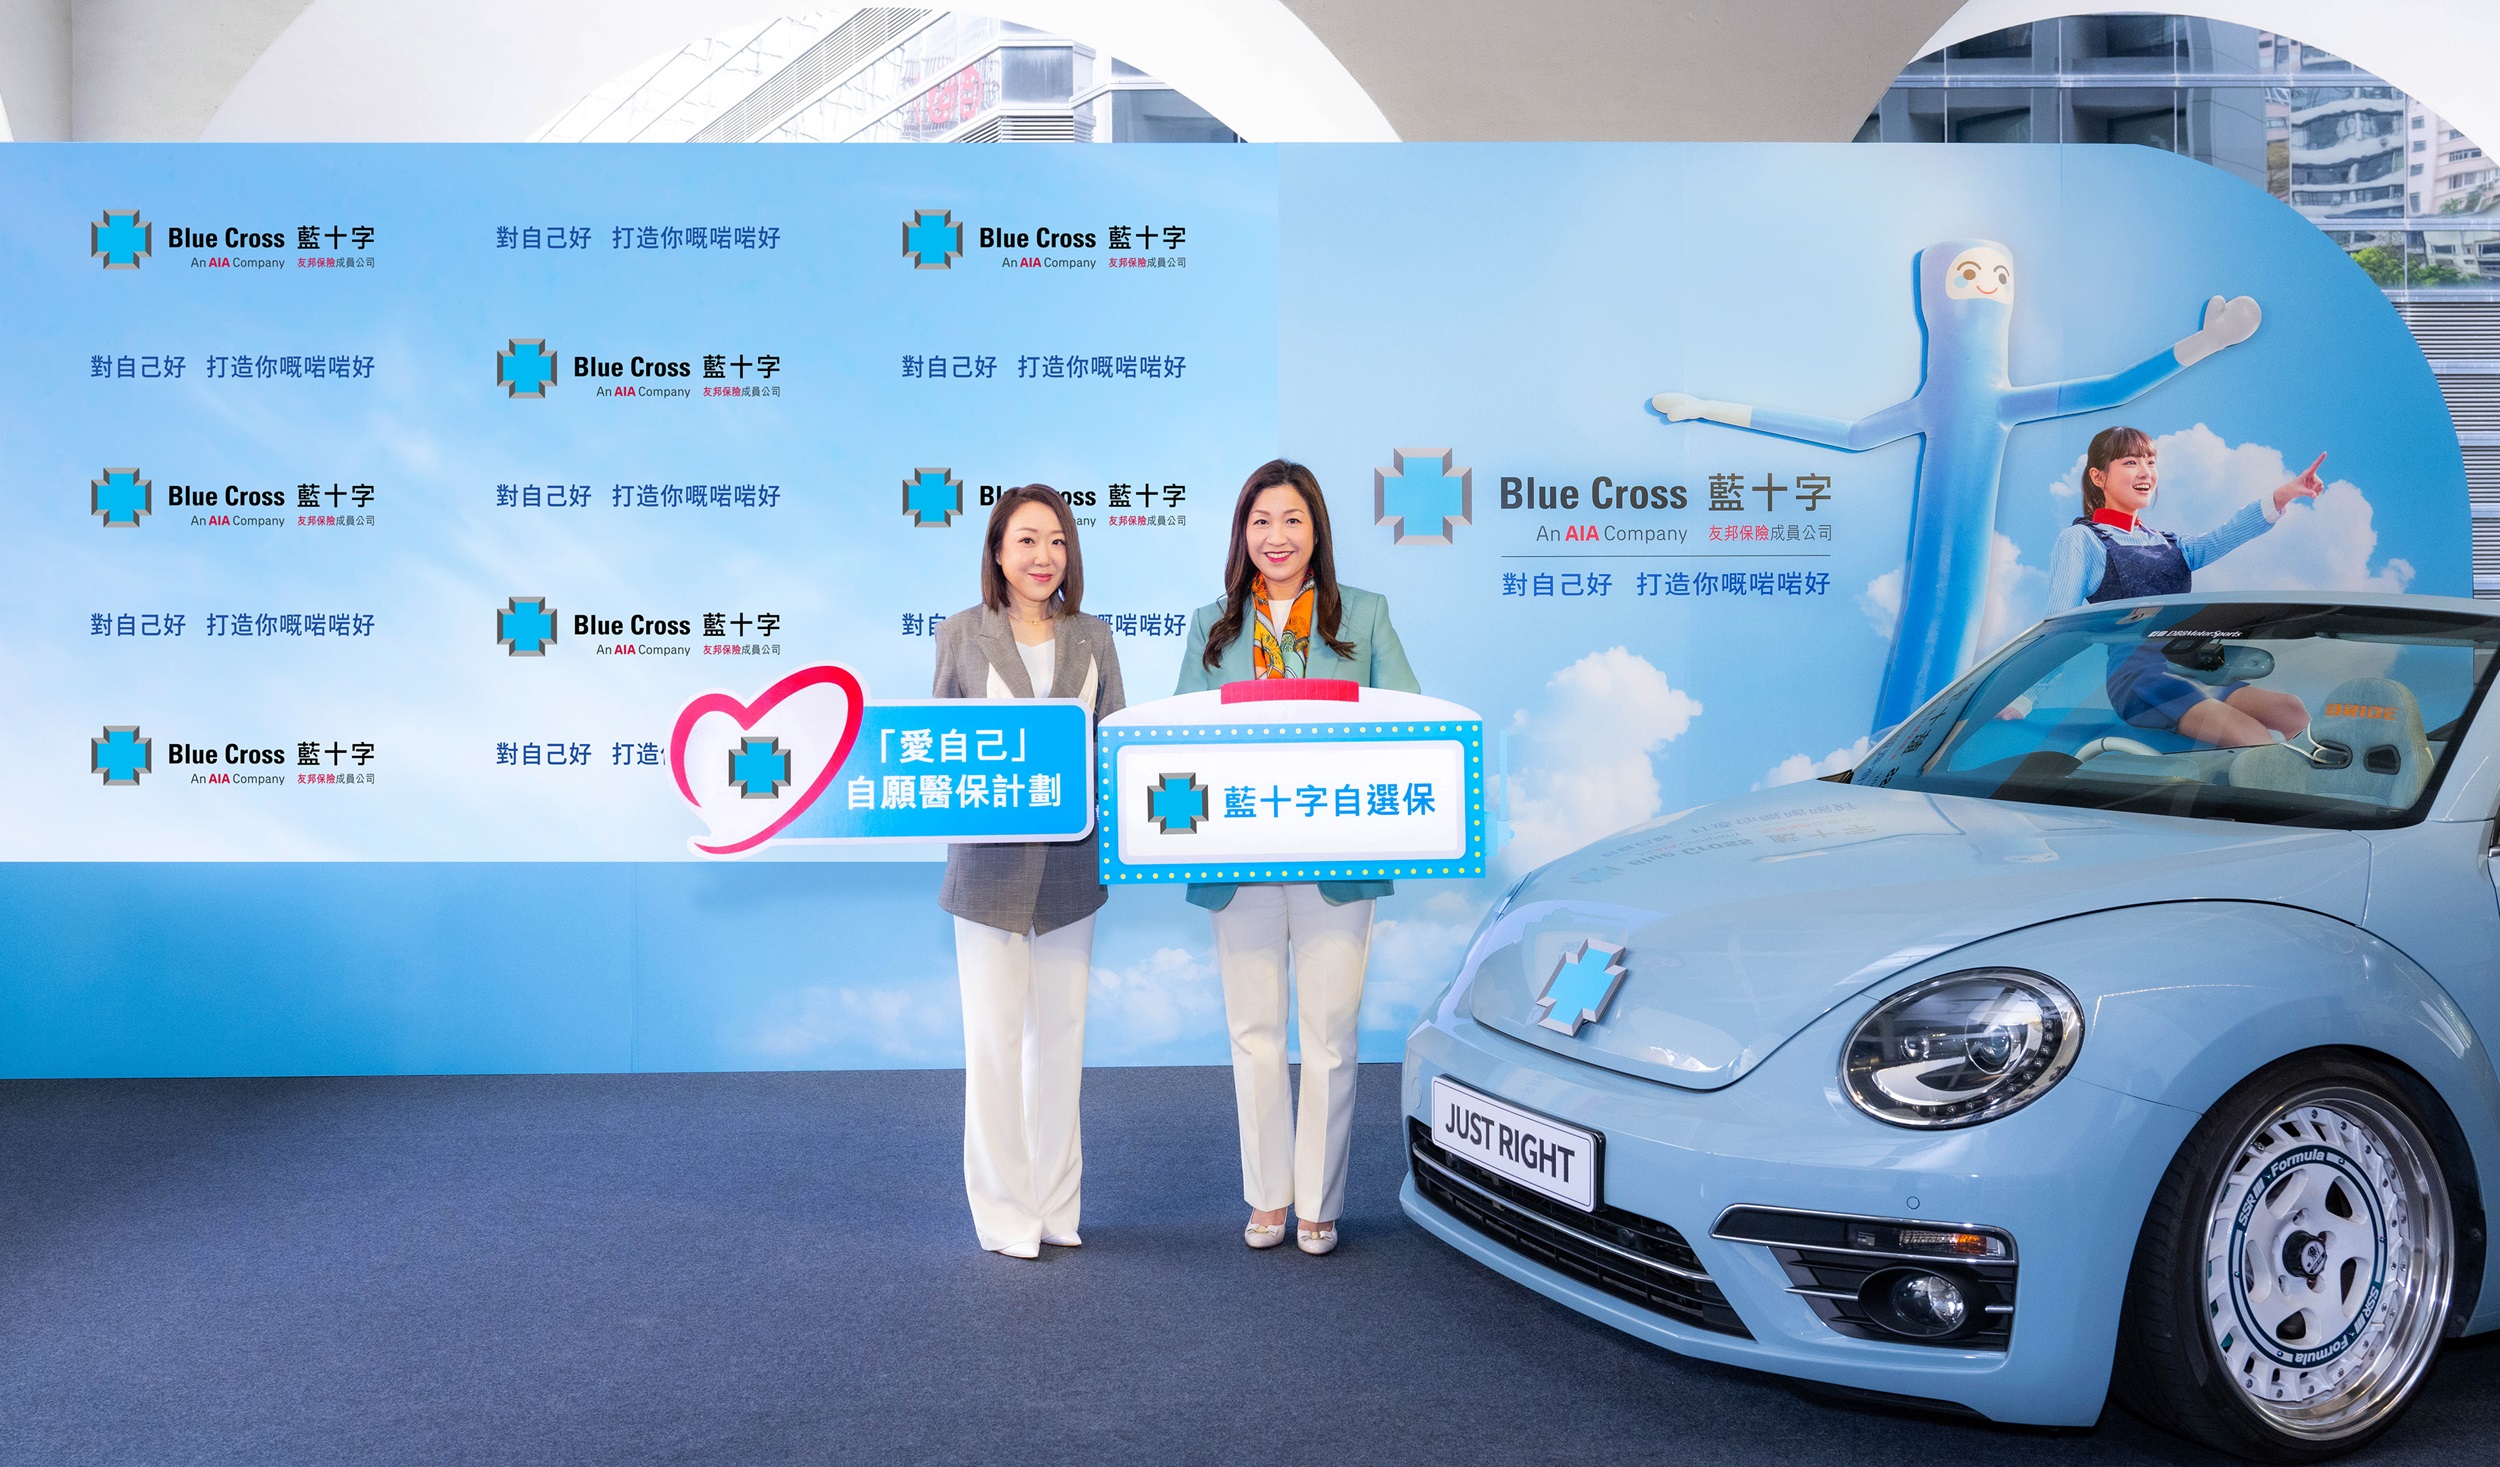 Ms Bonnie Tse, Chief Executive Officer of Blue Cross (right) and Ms Sylvia Chow, Director of Marketing of Blue Cross (left) share business updates and product strategies in the press conference.